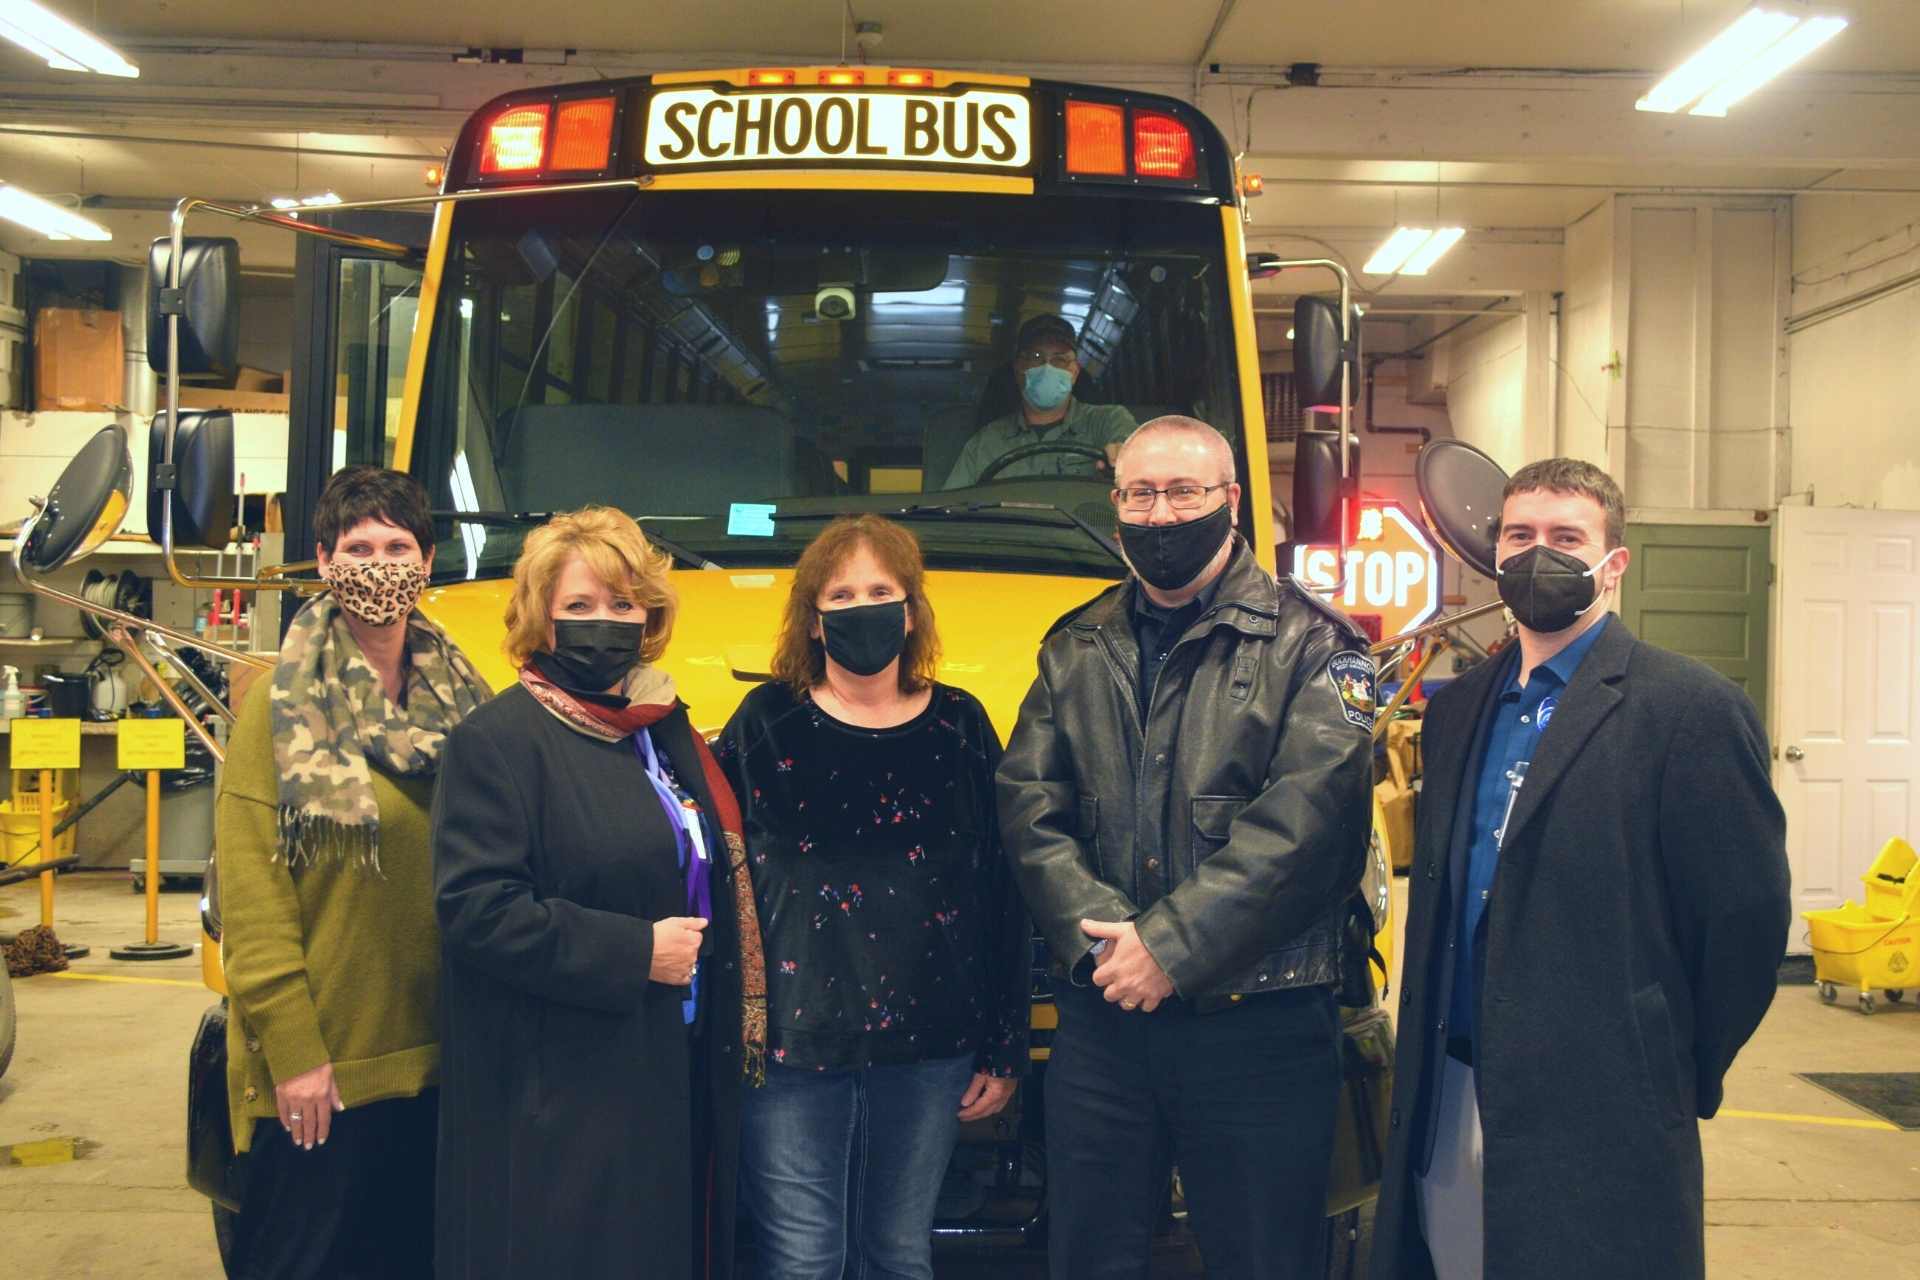 Pictured with the new lights on a bus are Upshur County Schools Transportation Director Jodie Akers, Upshur County School Superintendent Dr. Sara Lewis Stankus, Upshur County Schools Bus Operator Cathy Grill, Buckhannon Police Chief Matthew Gregory and Upshur County Schools Director of Safety and Emergency Preparedness Matthew Sisk.